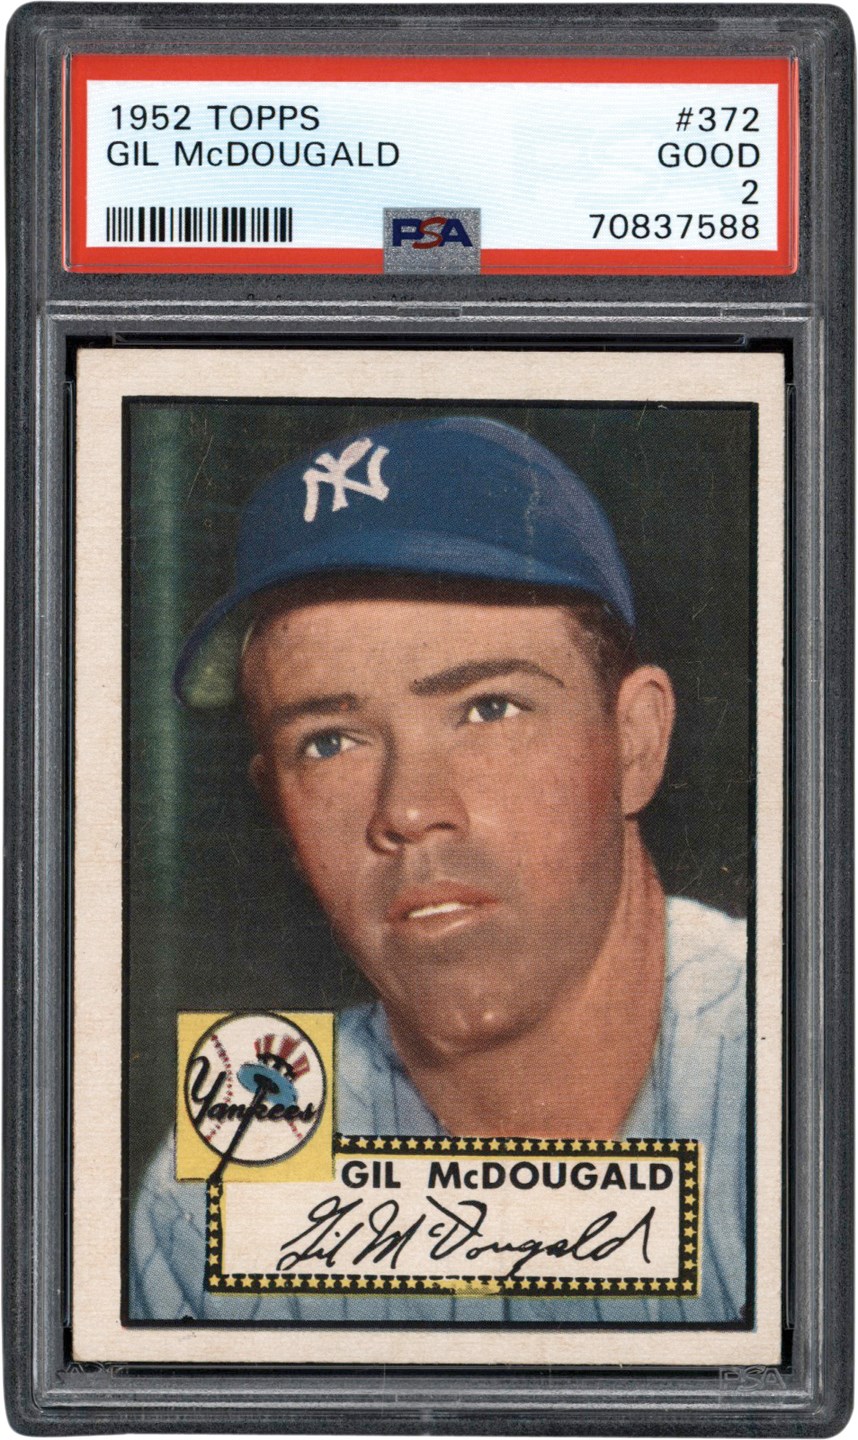 1952 Topps #372 Gil McDougald PSA GD 2 - Newly Discovered Example